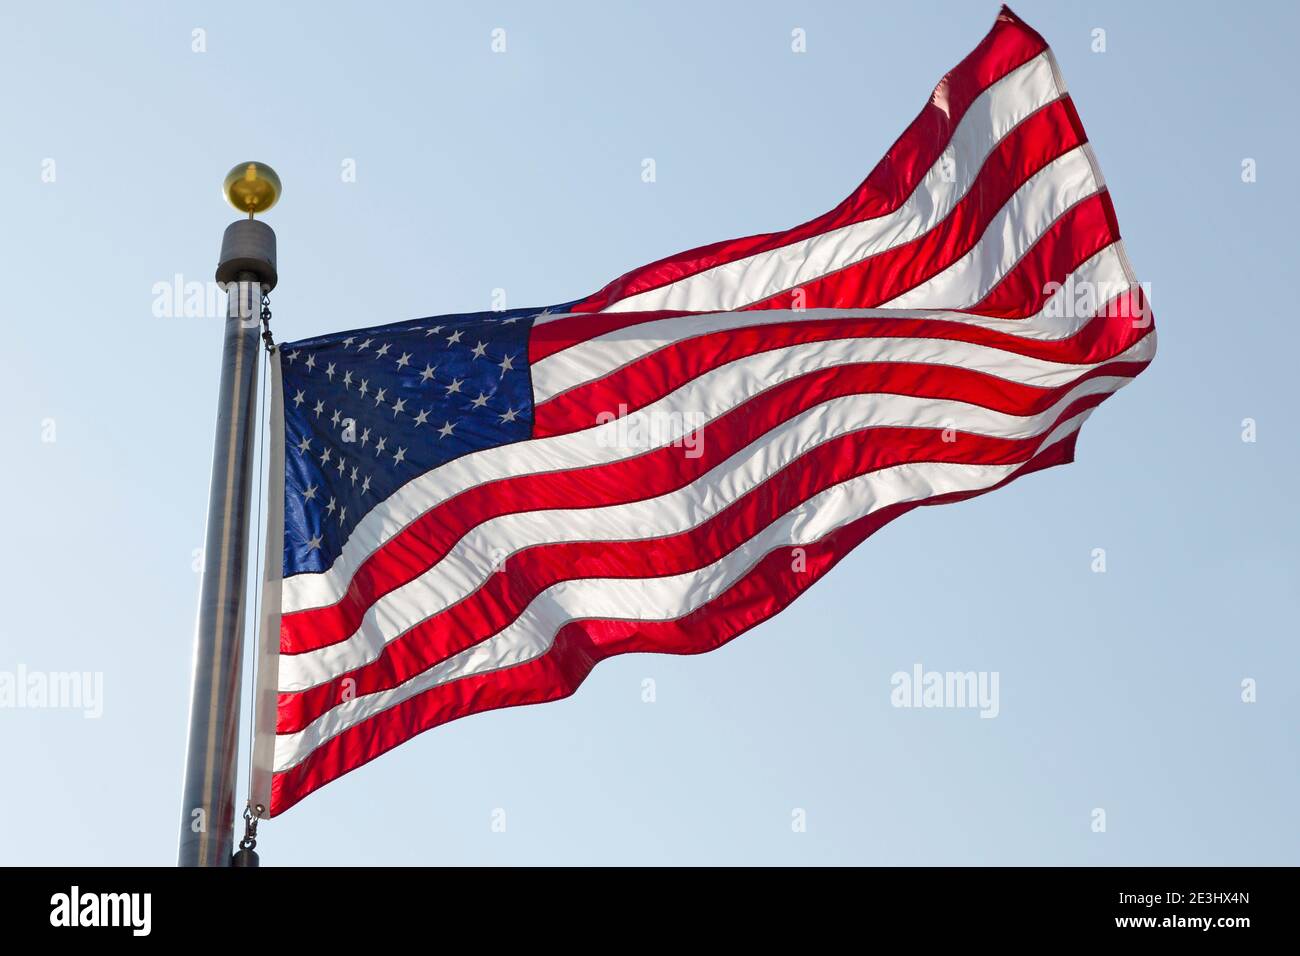 An American flag flying in Washington DC, USA. The national flag is know as Old Glory, the Stars and Stripes and the Star-Spangled banner. Stock Photo